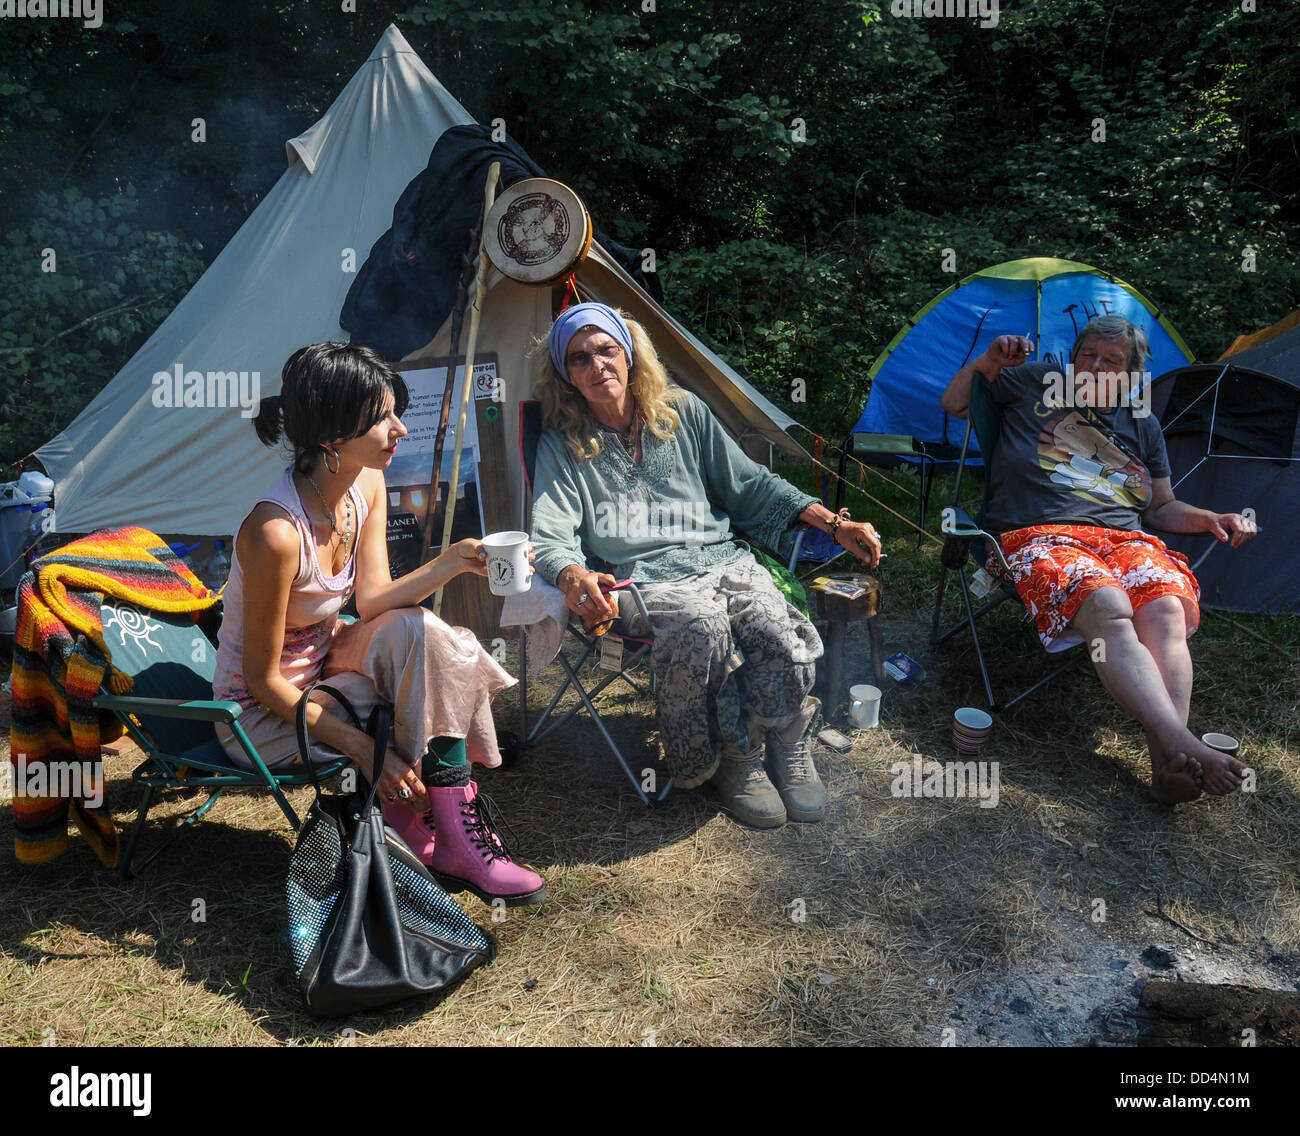 Balcombe, West Sussex, UK. 26th Aug, 2013. Natalie Hynde, left, daughter of Pretenders Chrissie Hynde at environmentalist camp in Balcombe. The anti fracking activists are protesting against drilling by Cuadrilla on the site in West Sussex. Contrary to recent press reports the camp is growing in size. Credit:  David Burr/Alamy Live News Stock Photo